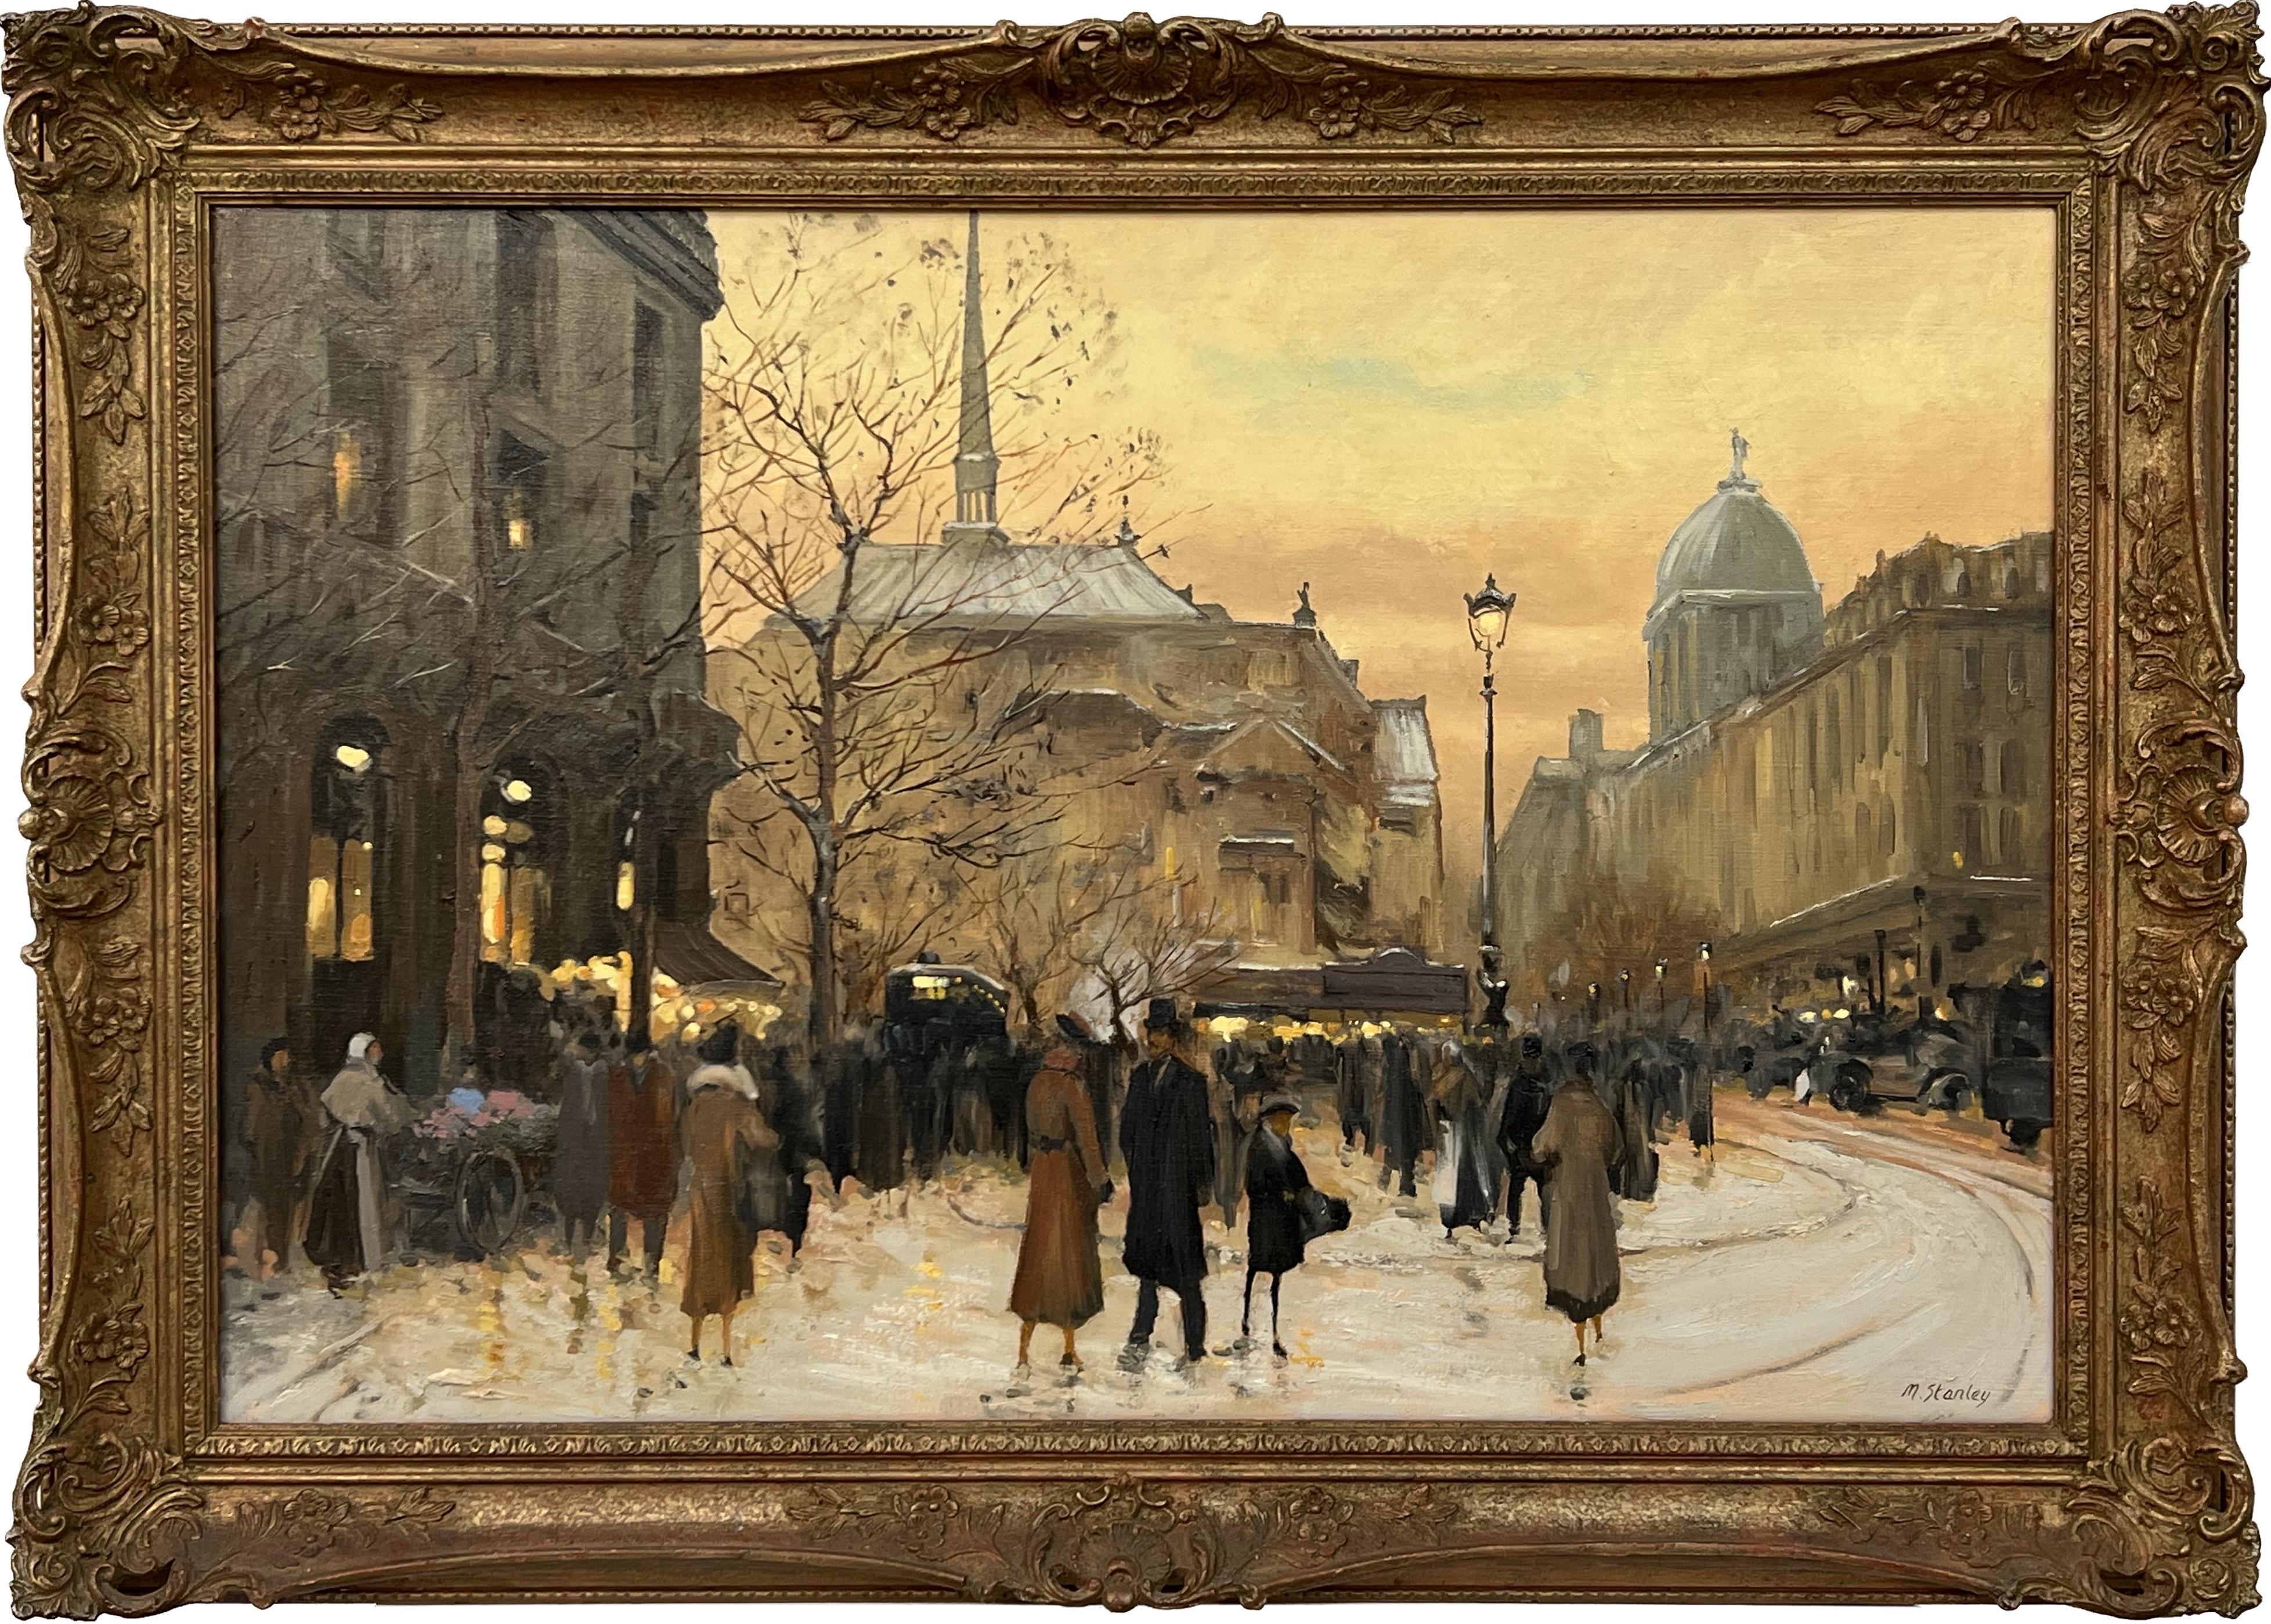 M Stanley Landscape Painting - Painting of Figures at a Parisian Market at Wintertime in the Late 19th Century